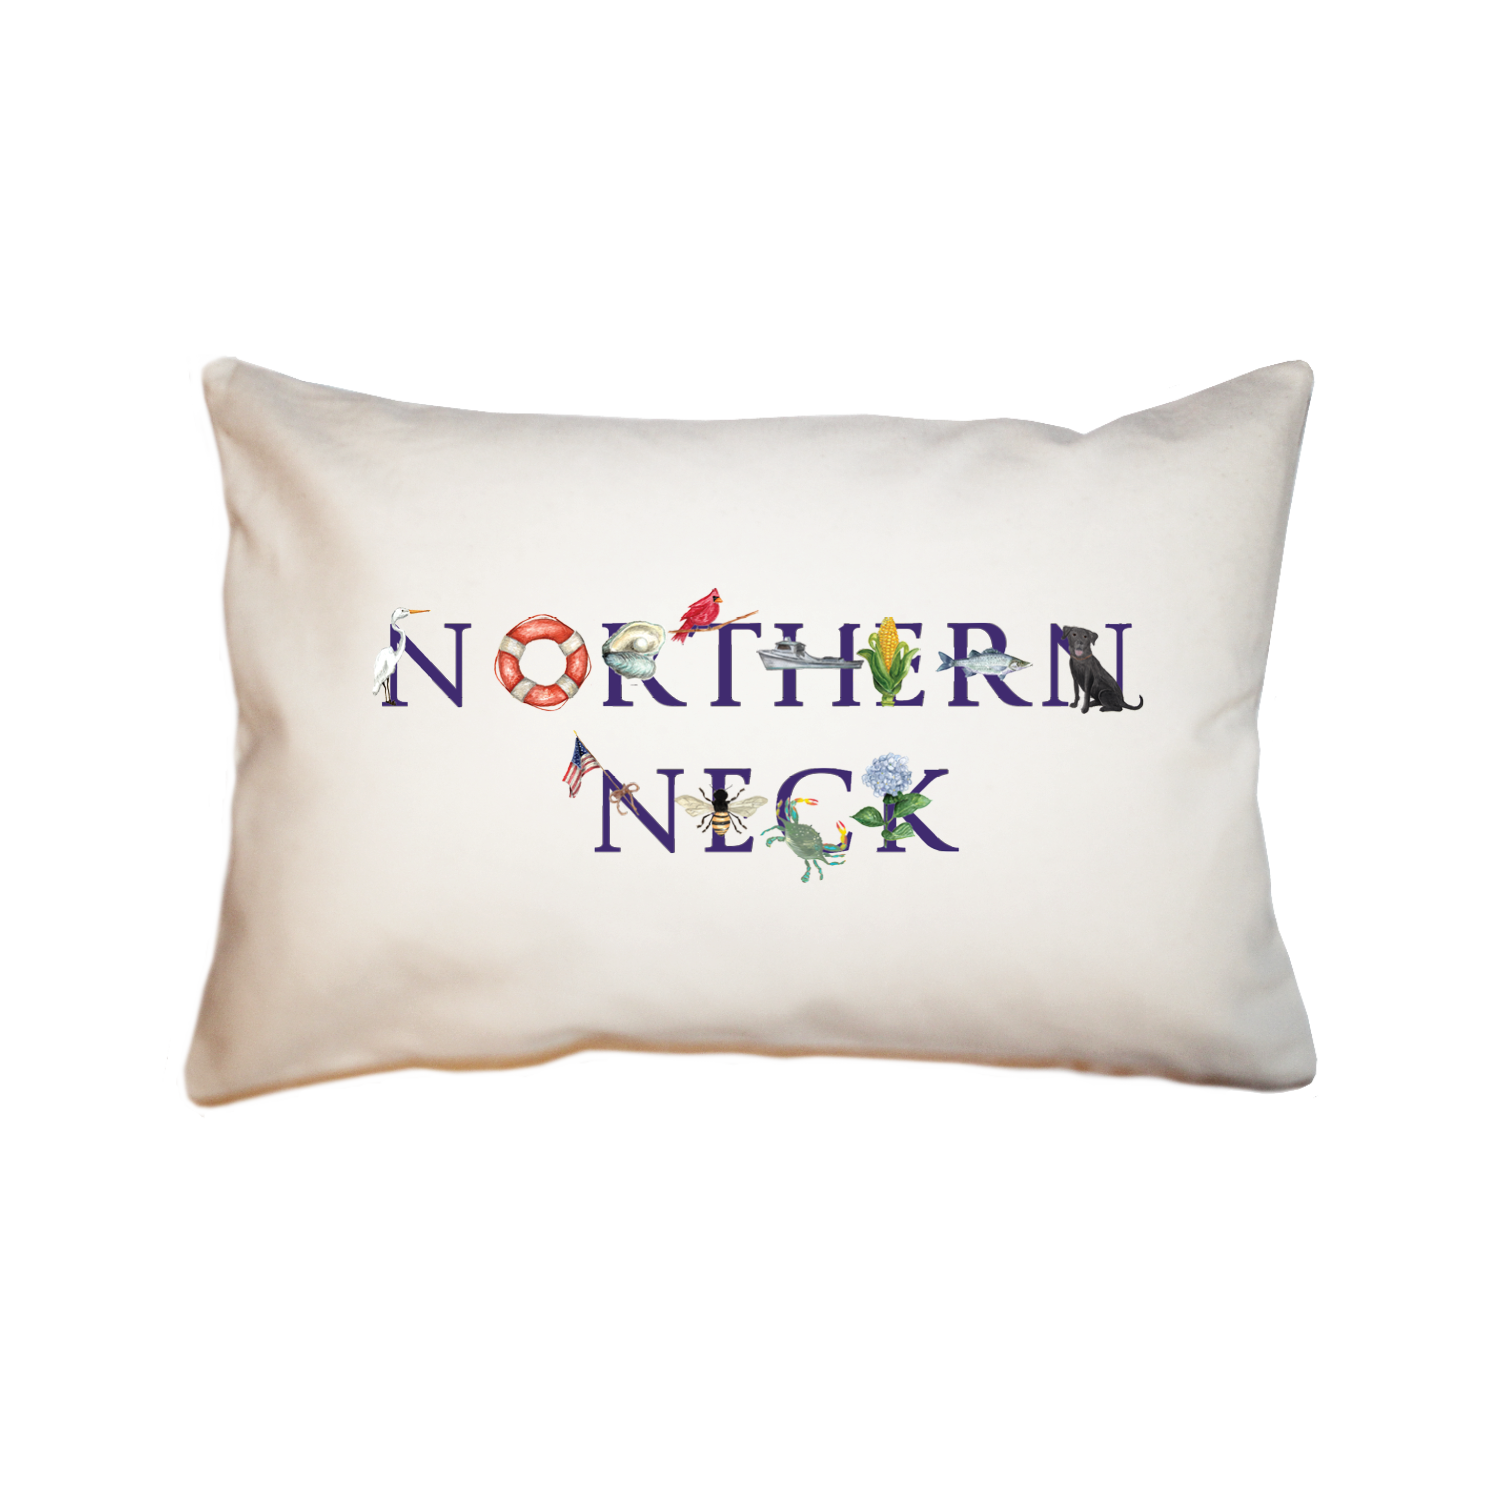 northern neck large rectangle pillow